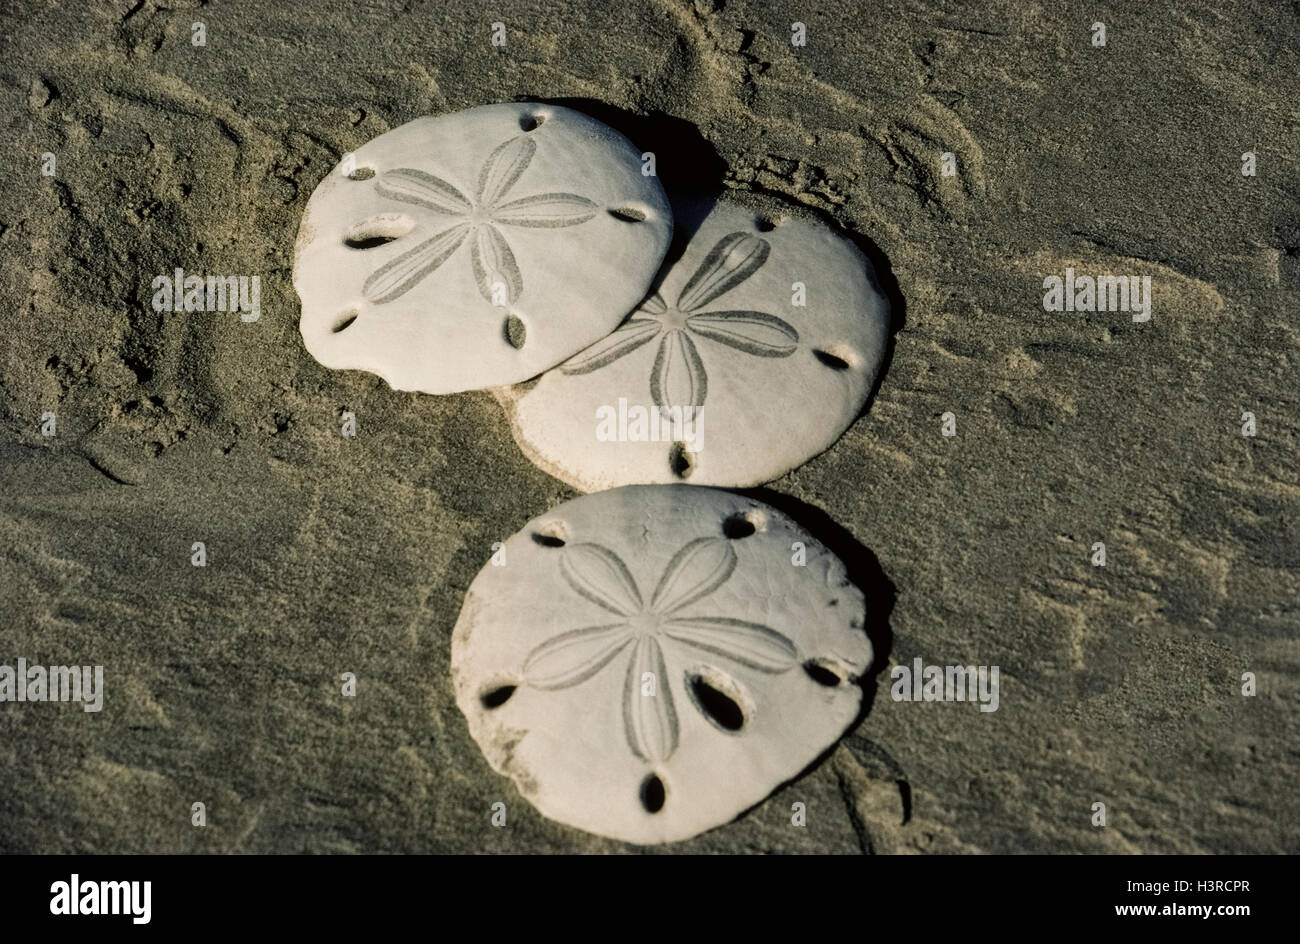 Sun-bleached skeletons of dead marine animals commonly known as Sand Dollars  are seen on a sandy beach on Magdalena Island in the Pacific Ocean off the  west coast of the Baja California